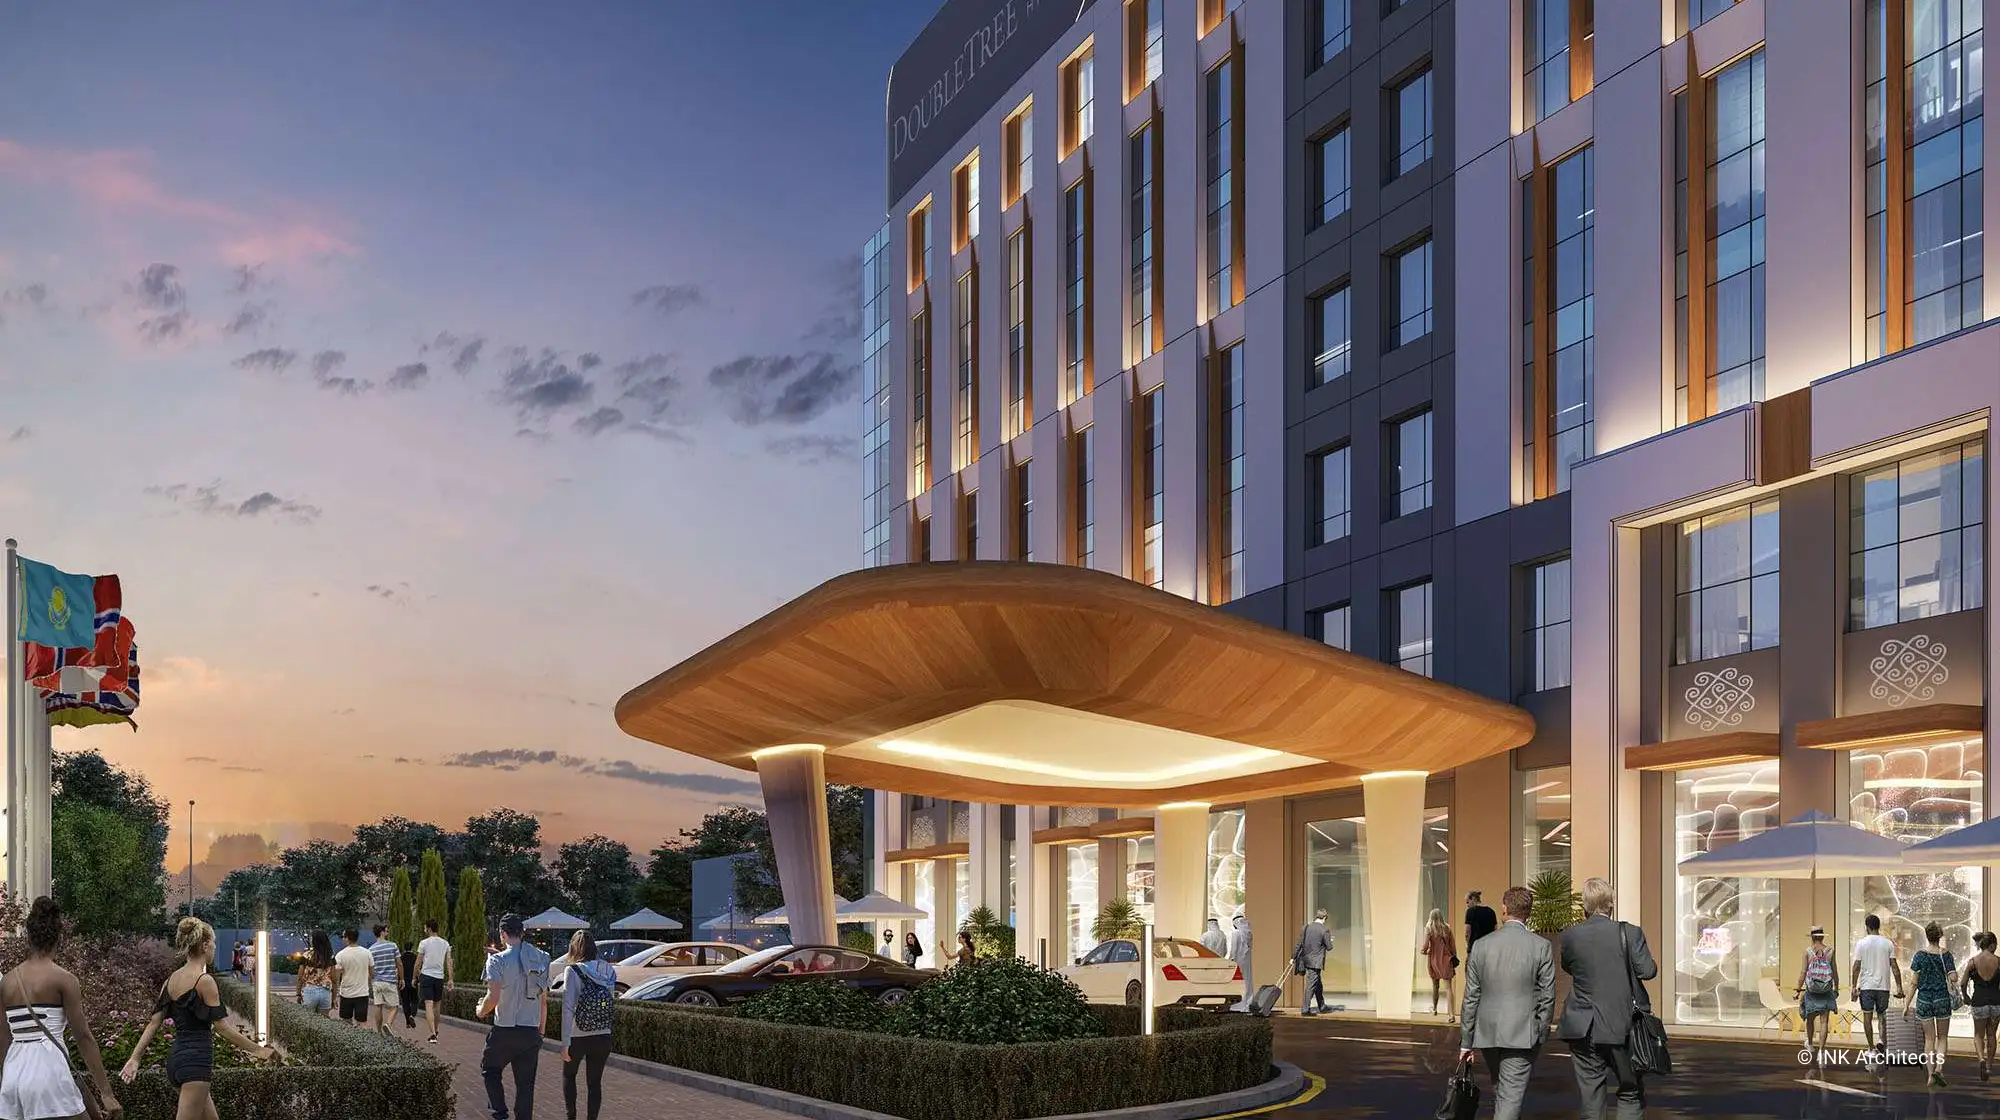 Architectural design of the DoubleTree by Hilton hotel. Architectural design services. Architectural bureau INK Architects